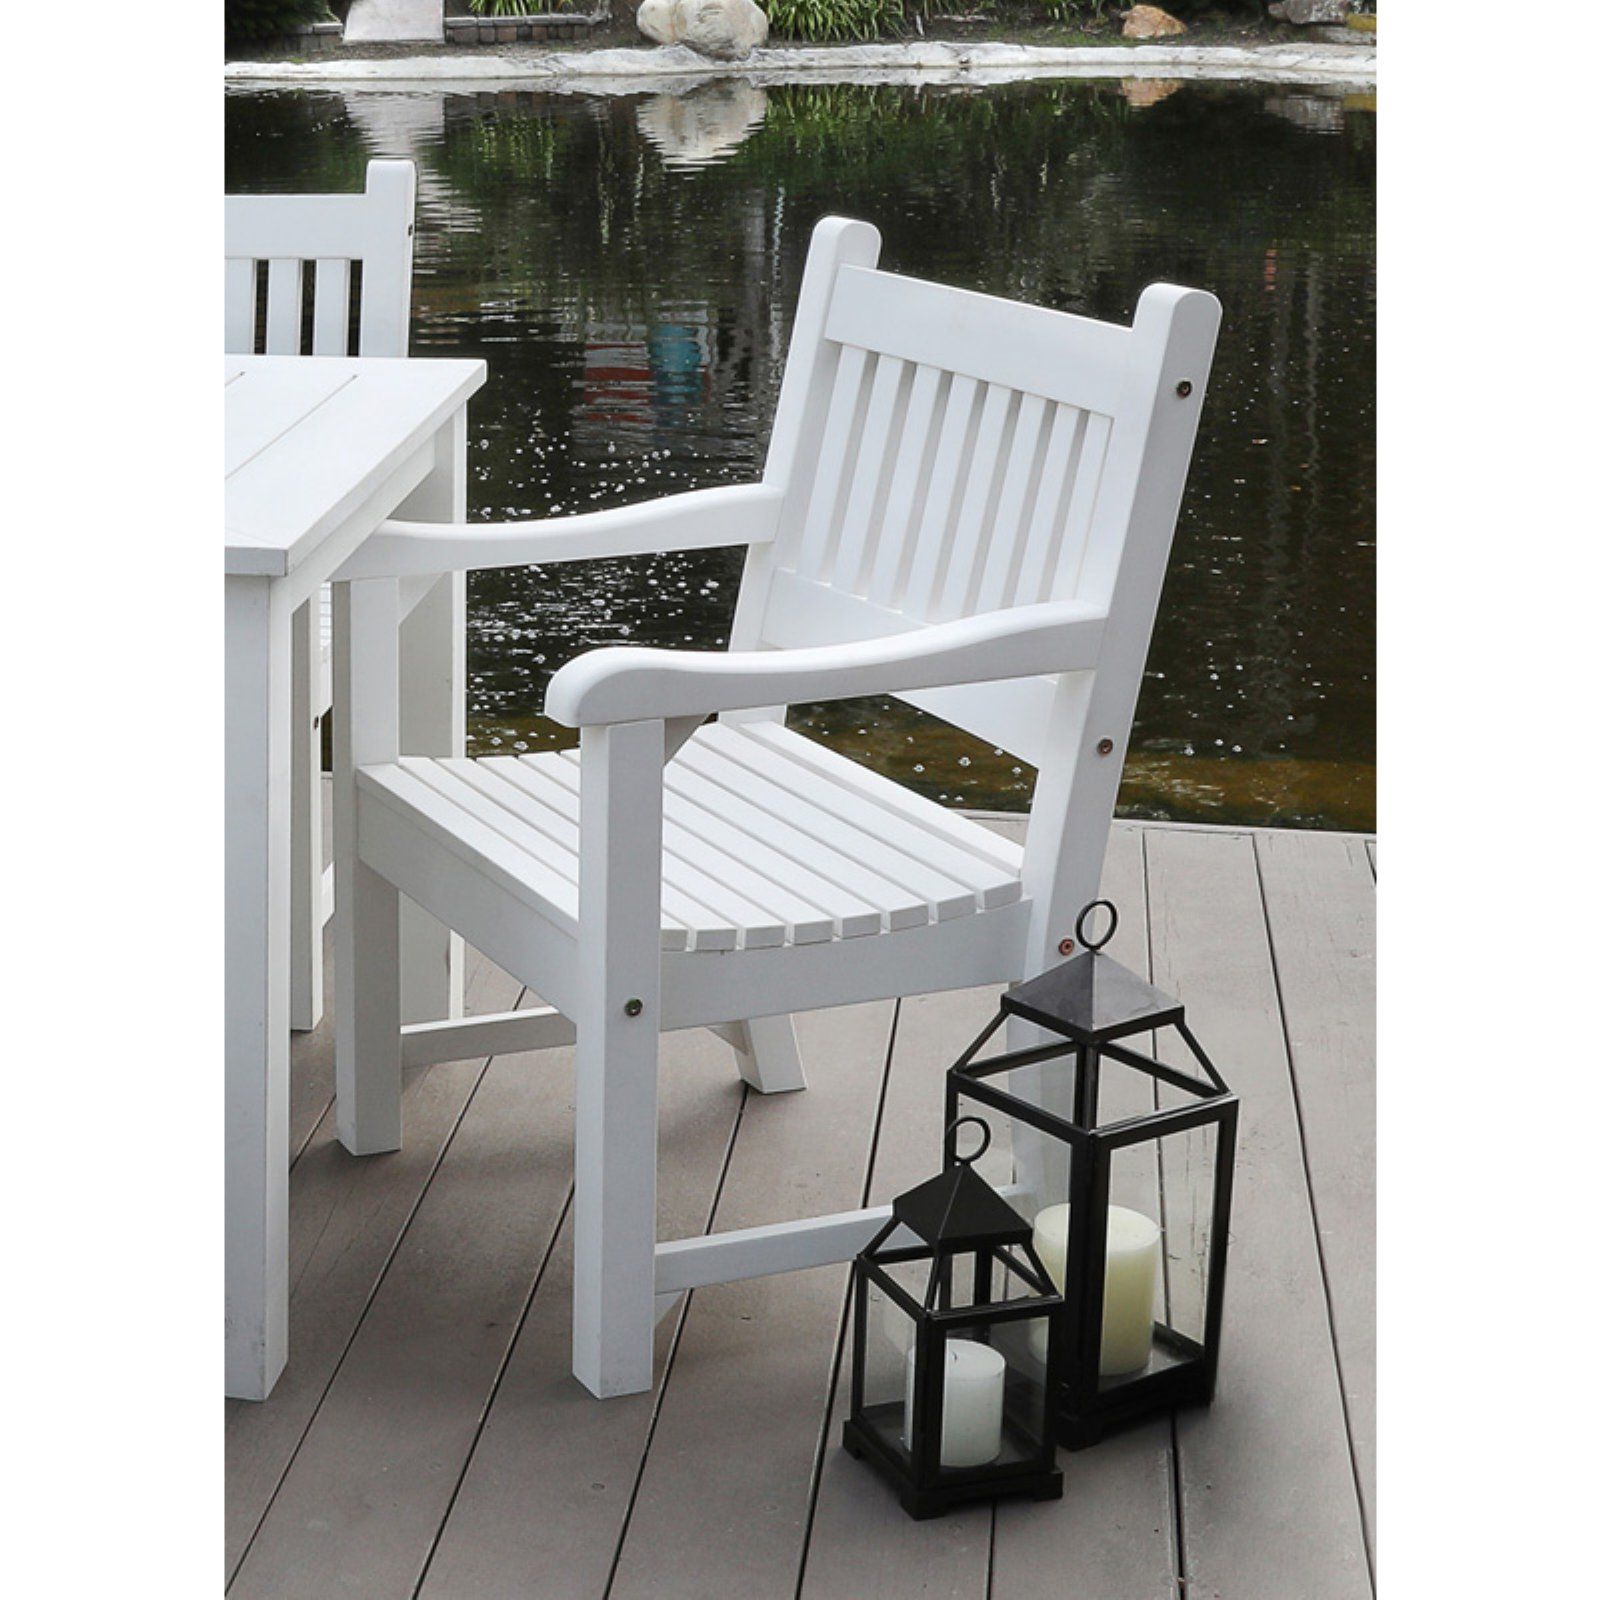 Shine Company Sunrise Outdoor Plastic Dining Chair – White – Walmart Intended For Well Known White Fabric Outdoor Patio Sets (View 12 of 15)